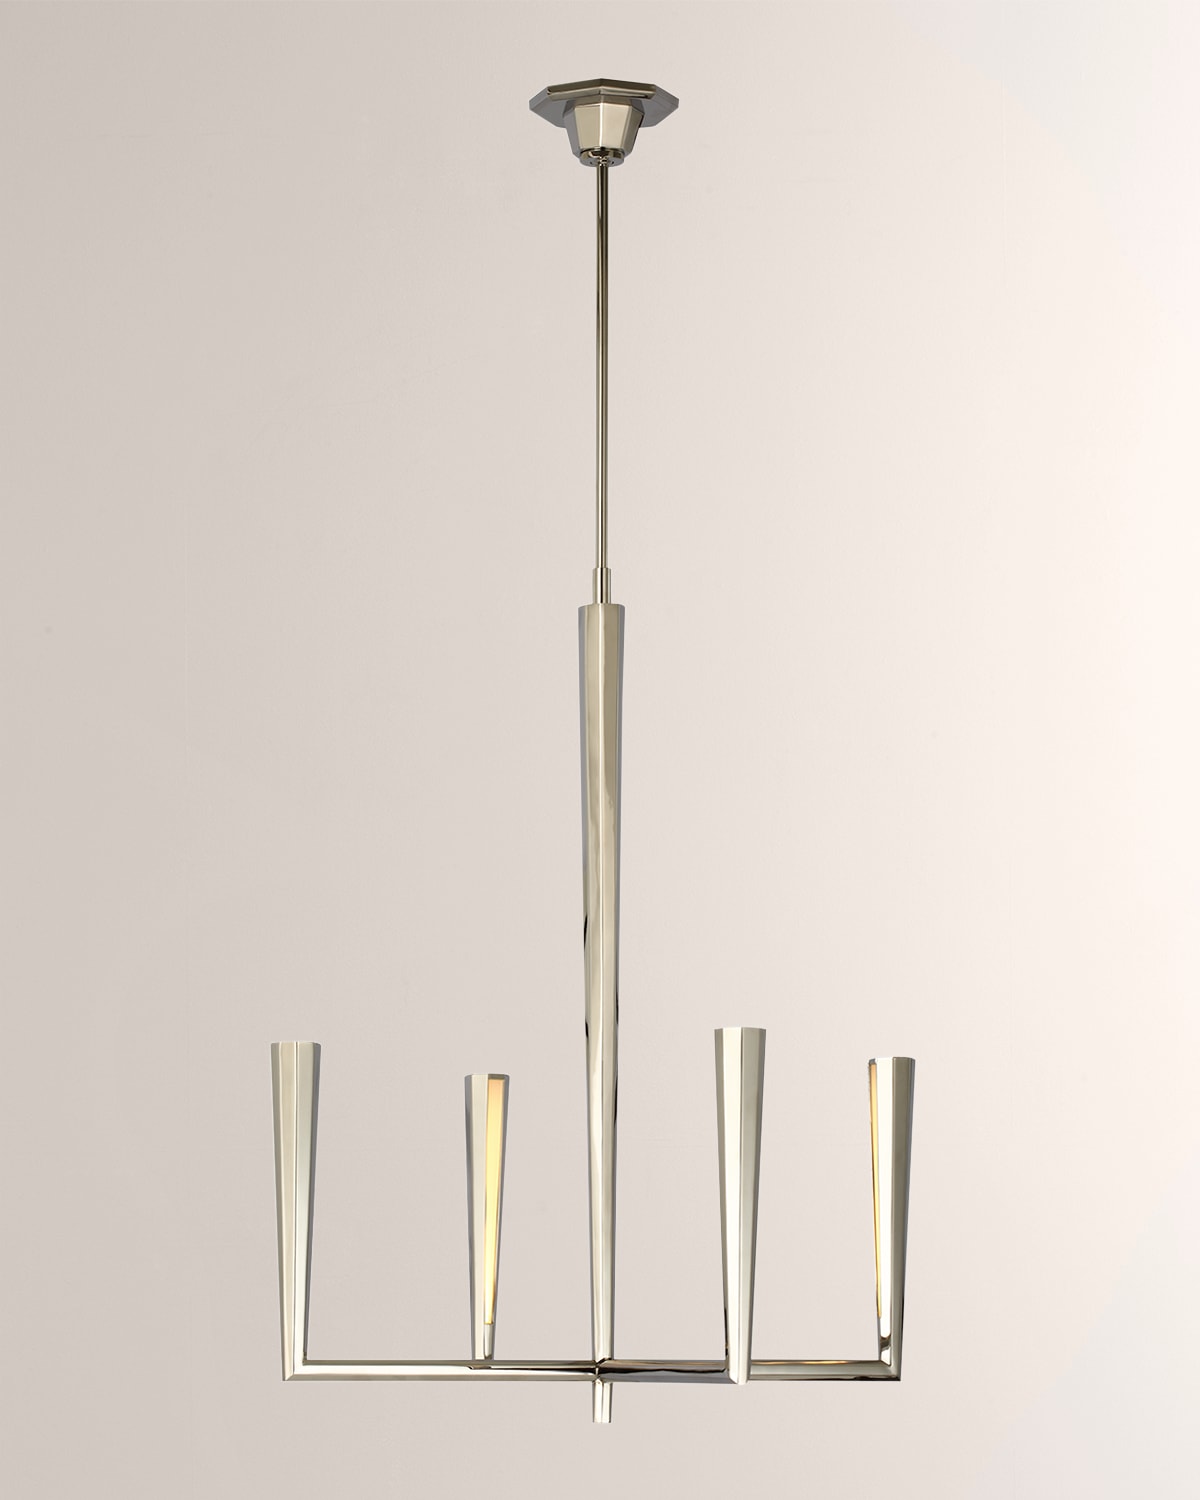 Shop Visual Comfort Signature Galahad Small Chandelier By Thomas O'brien In Polished Nickel